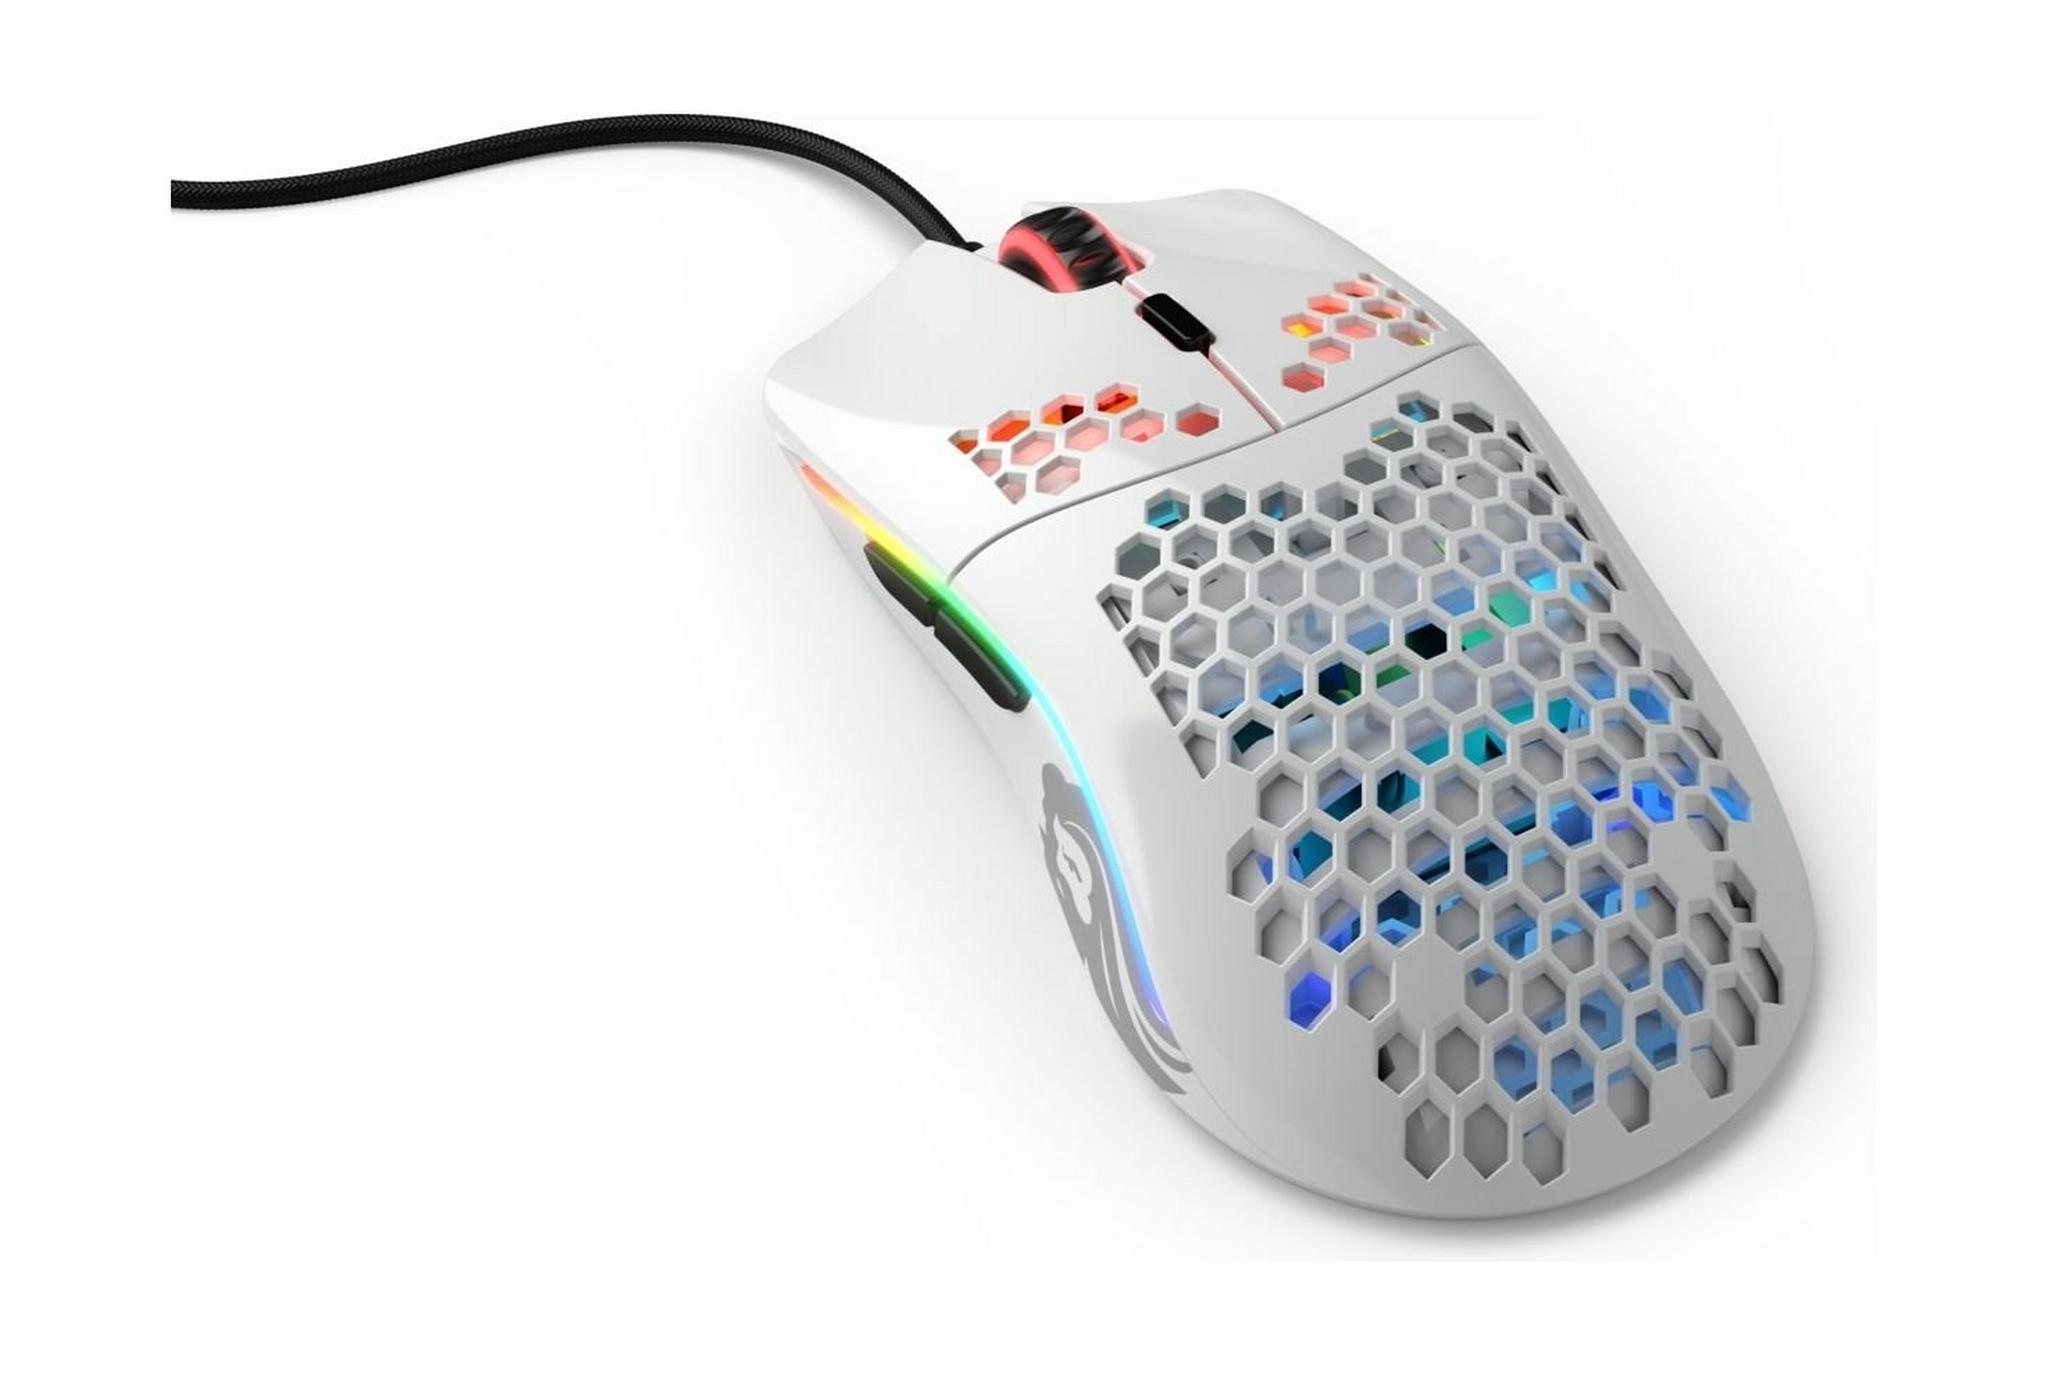 Glorious Model O Gaming Mouse - Glossy White